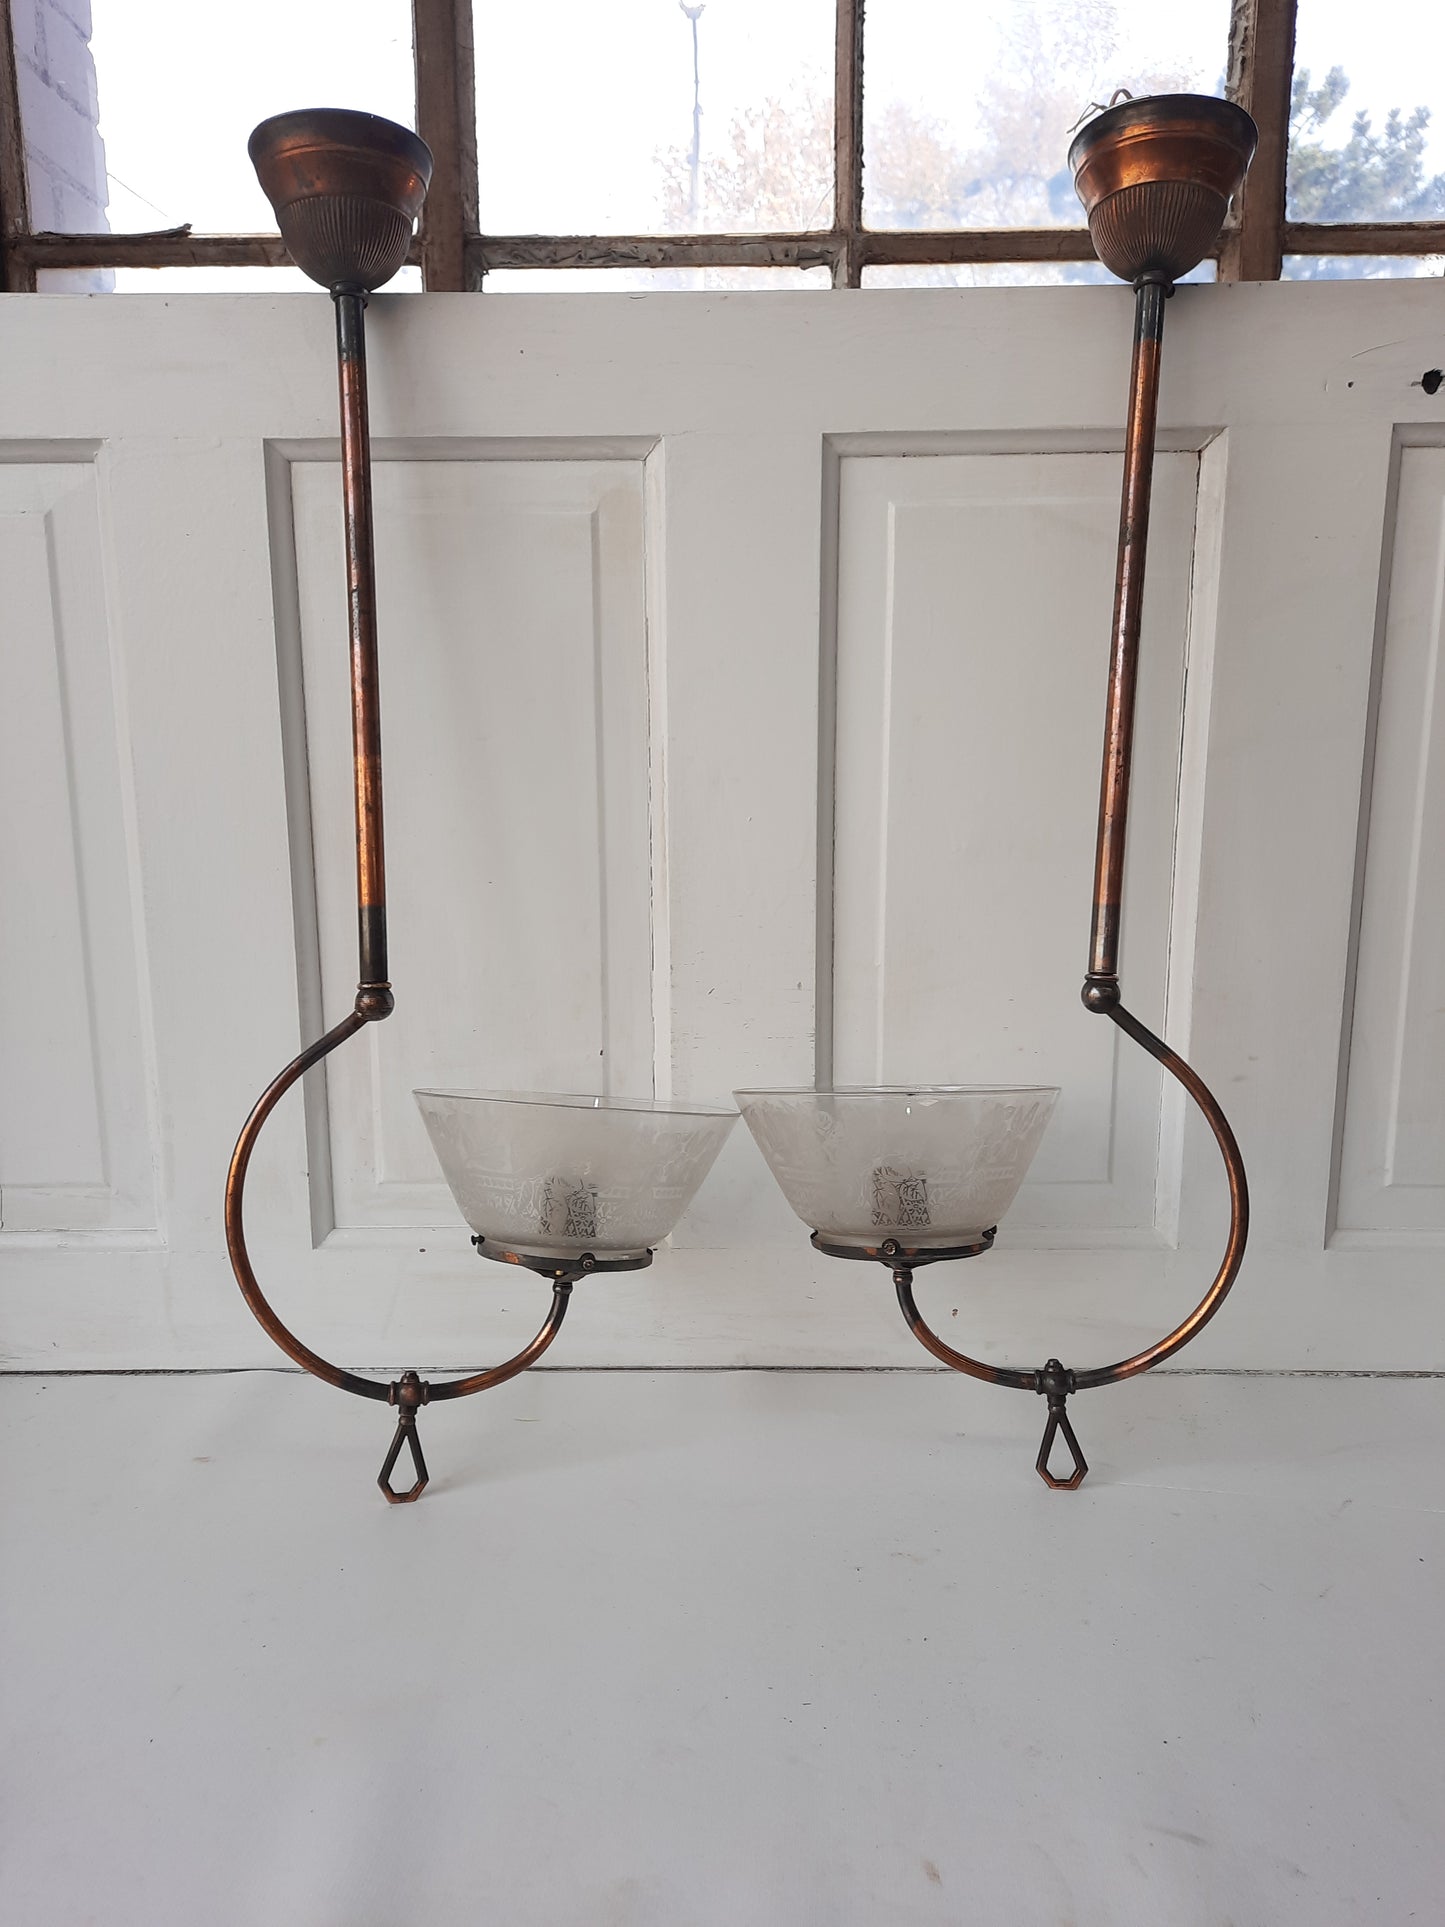 Pair of Converted Gas Ceiling Lights with Etched Glass Shades, Antique Gas Light Fixtures 111601